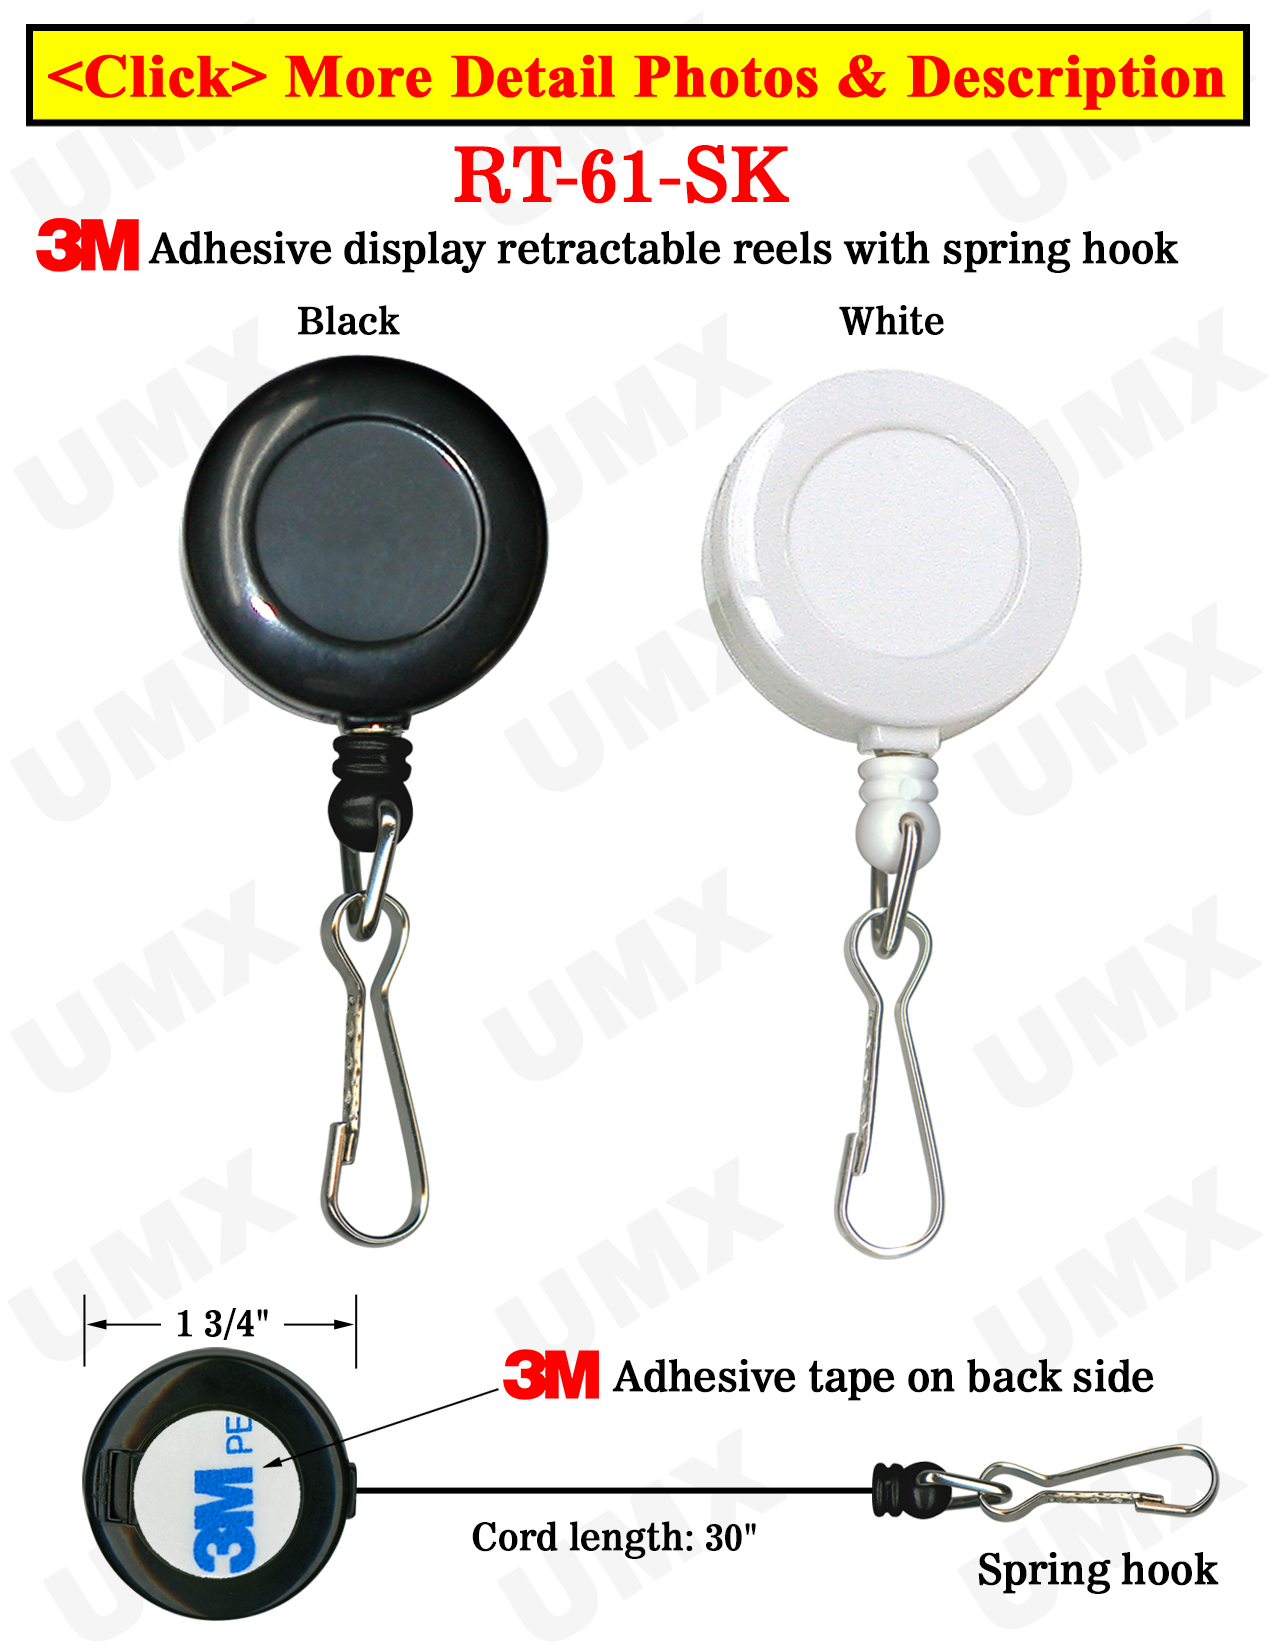 High Quality & Cheap Convention Display Retractable Convention Disply Reels With Metal Spring Hooks and Adhesive Backing